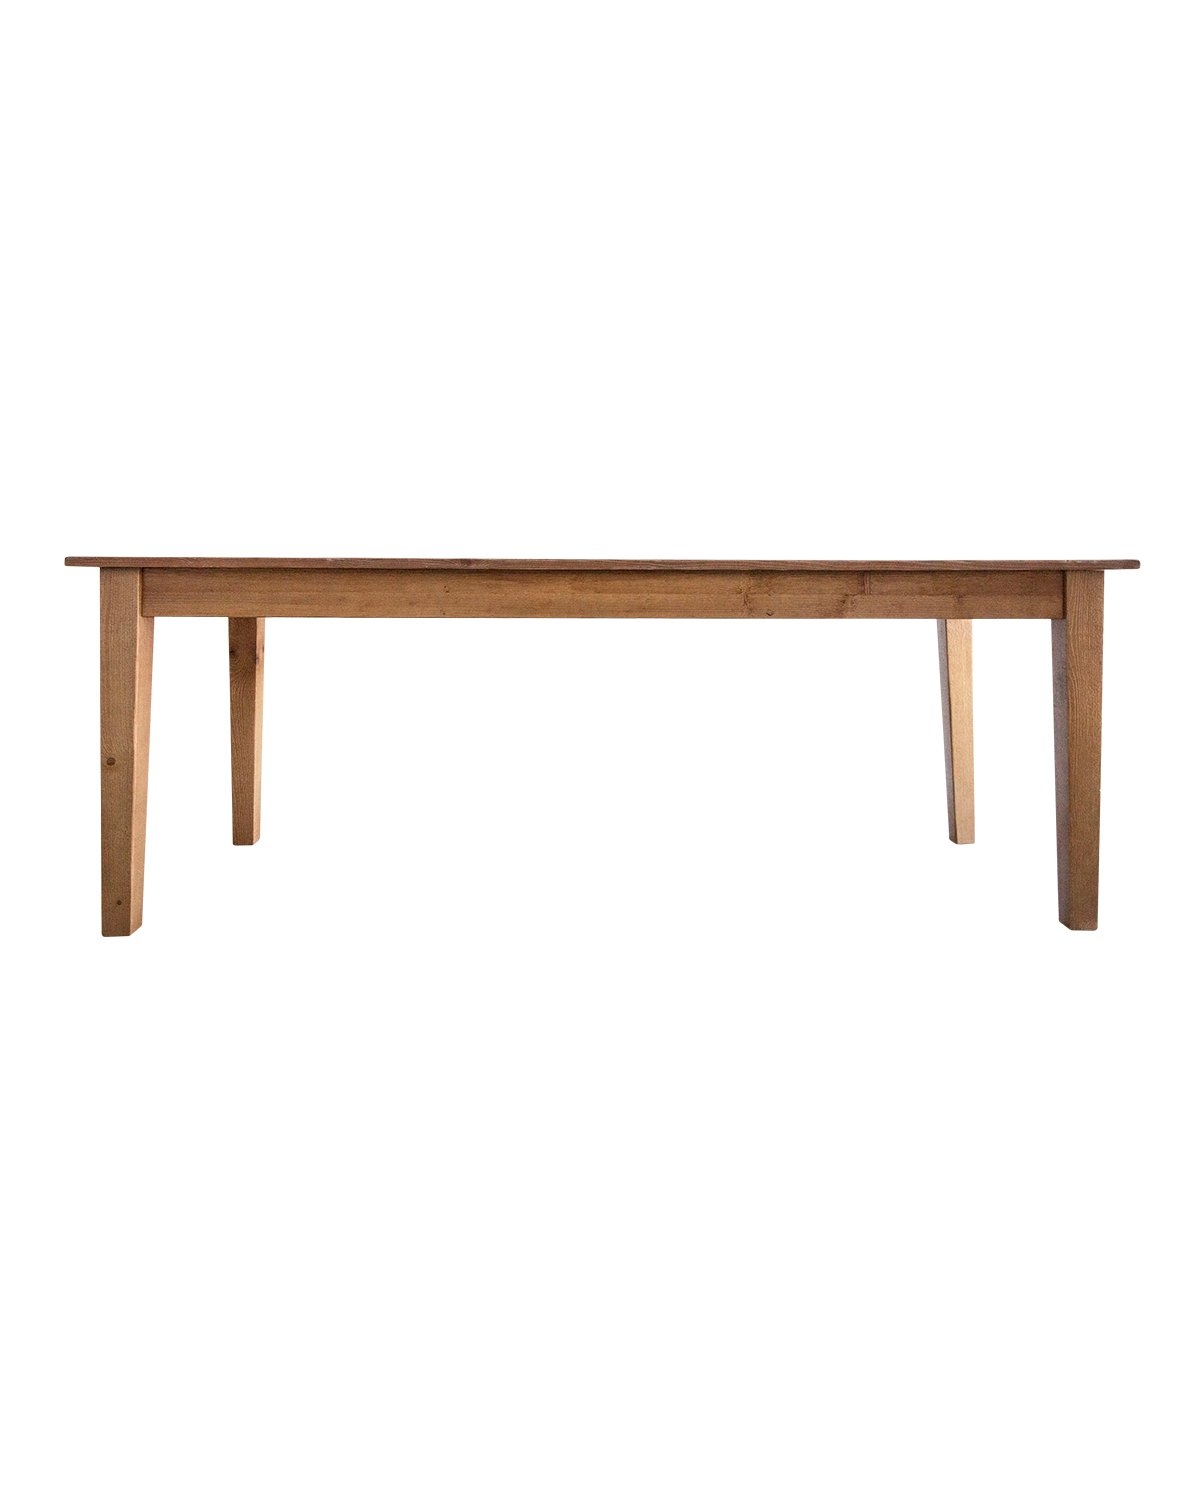 FLEUR DINING TABLE - Image 1